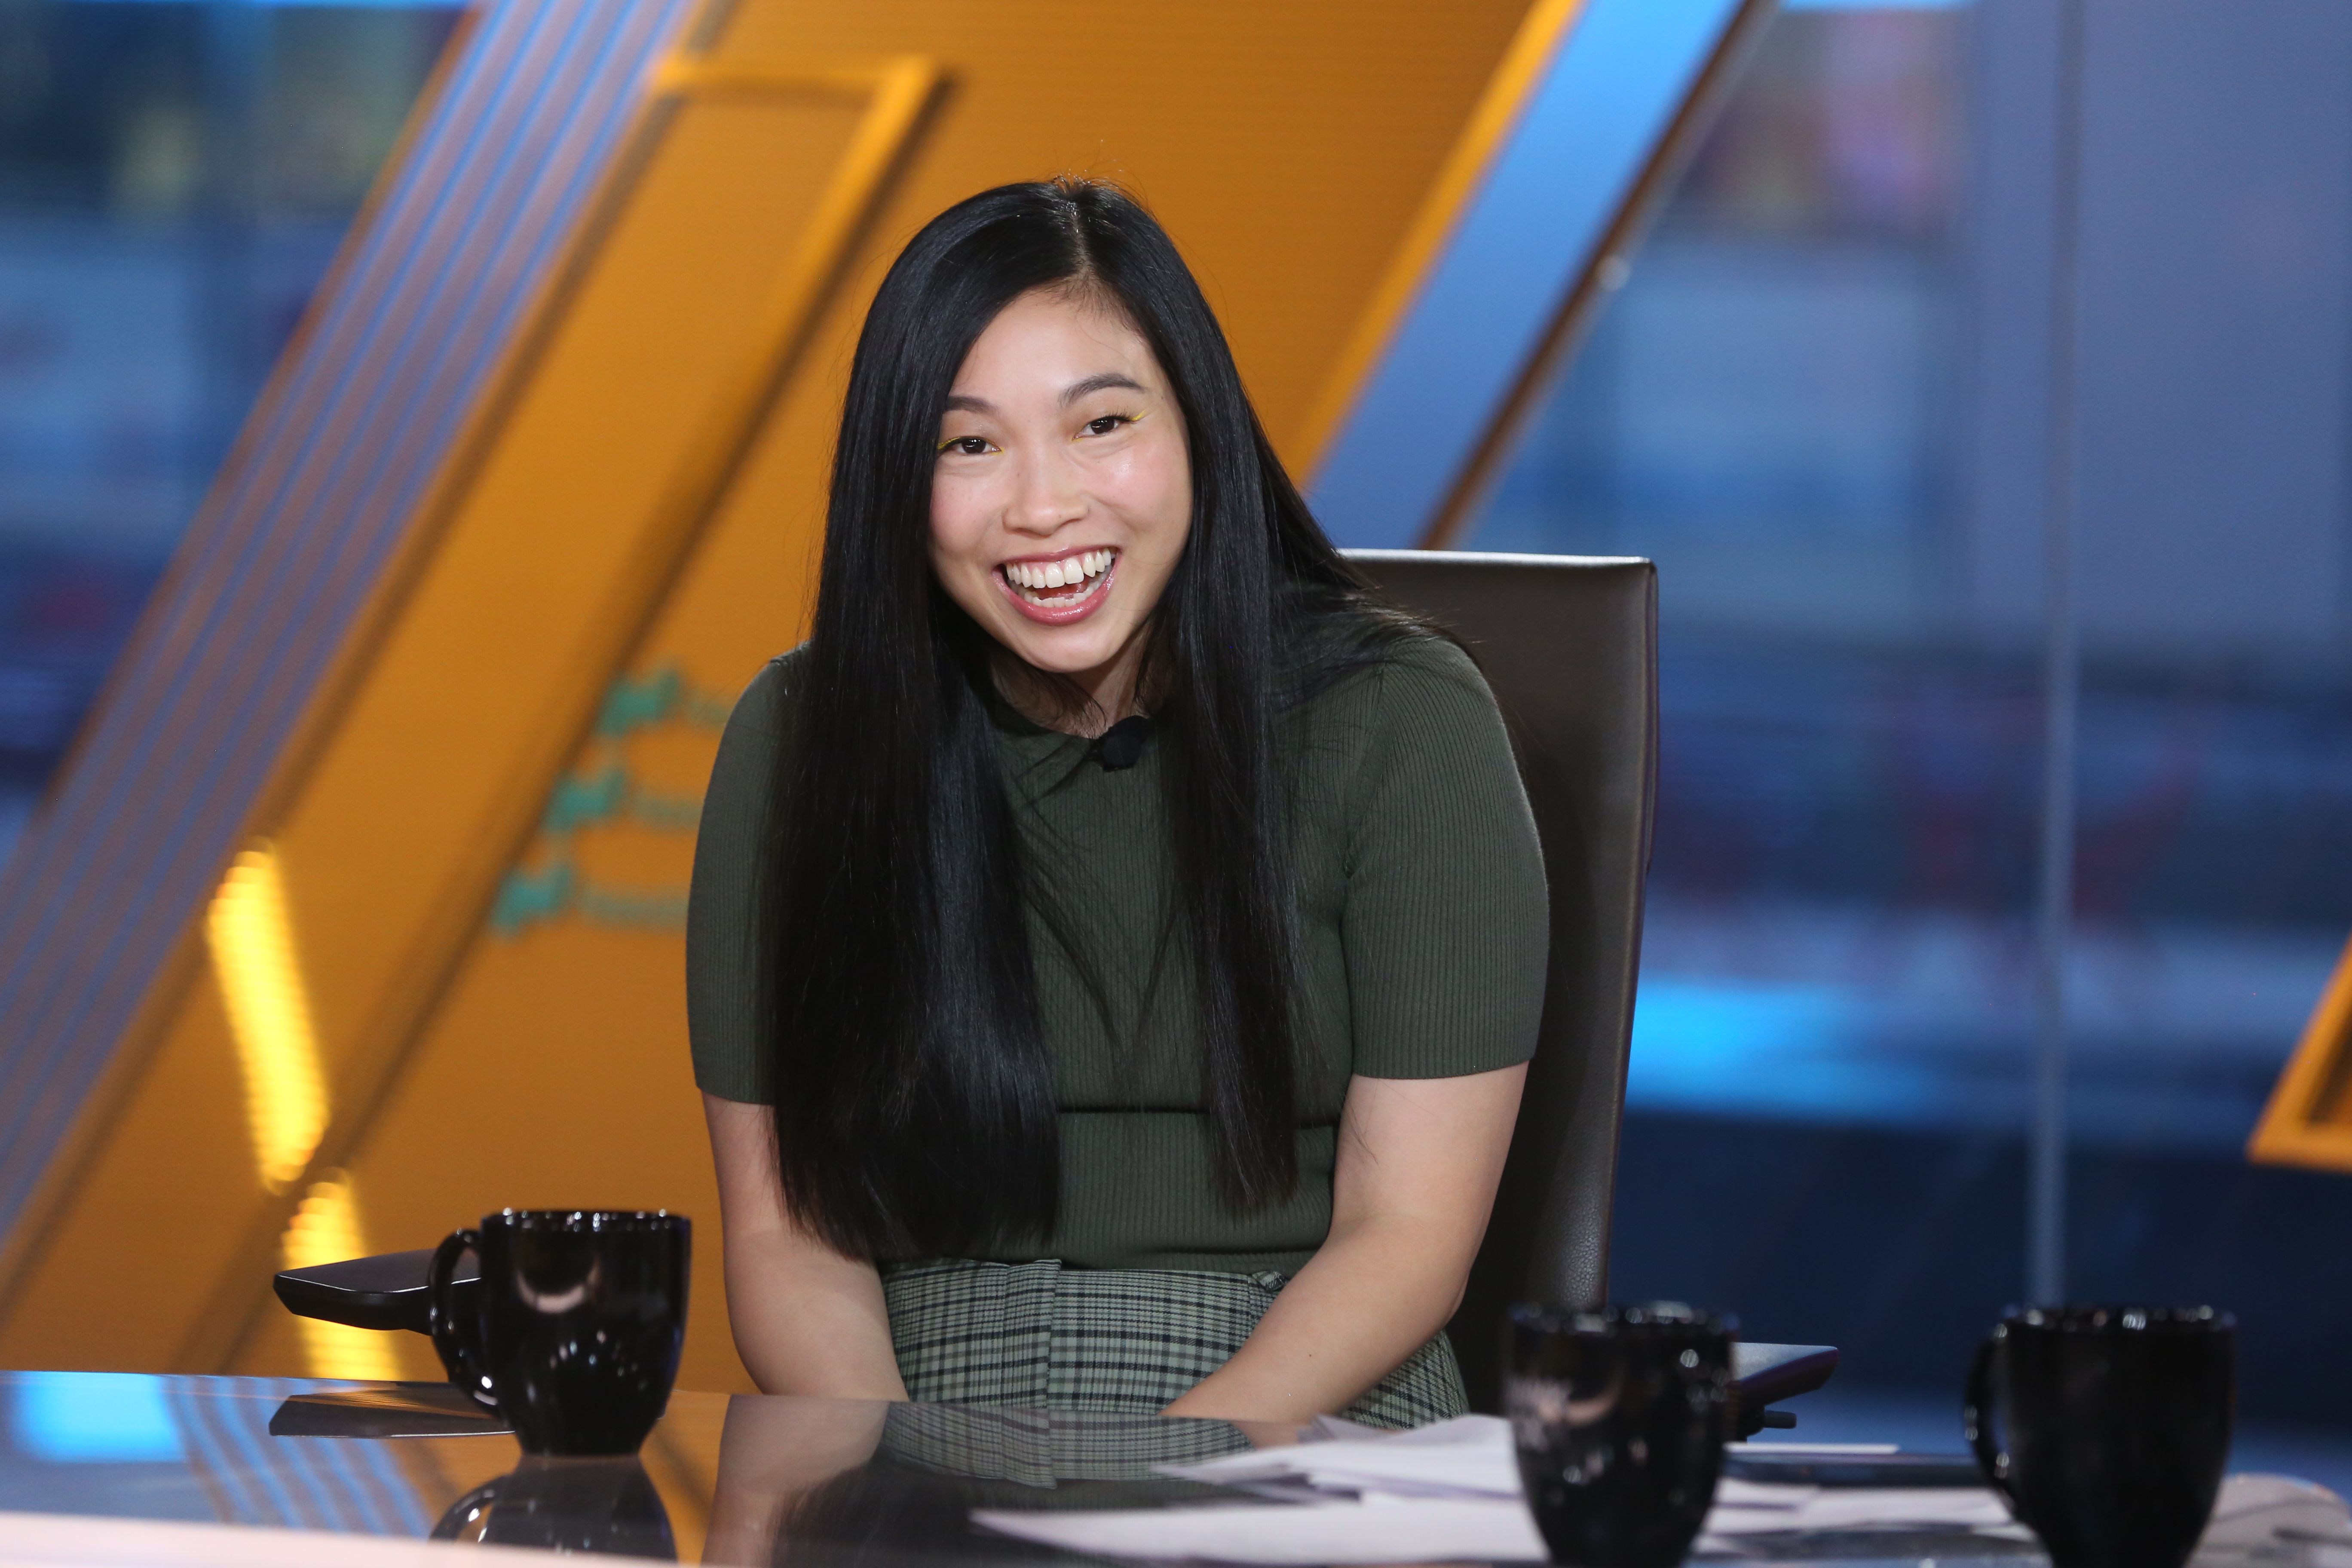 Awkwafina 'never thought' she'd have a career in show business